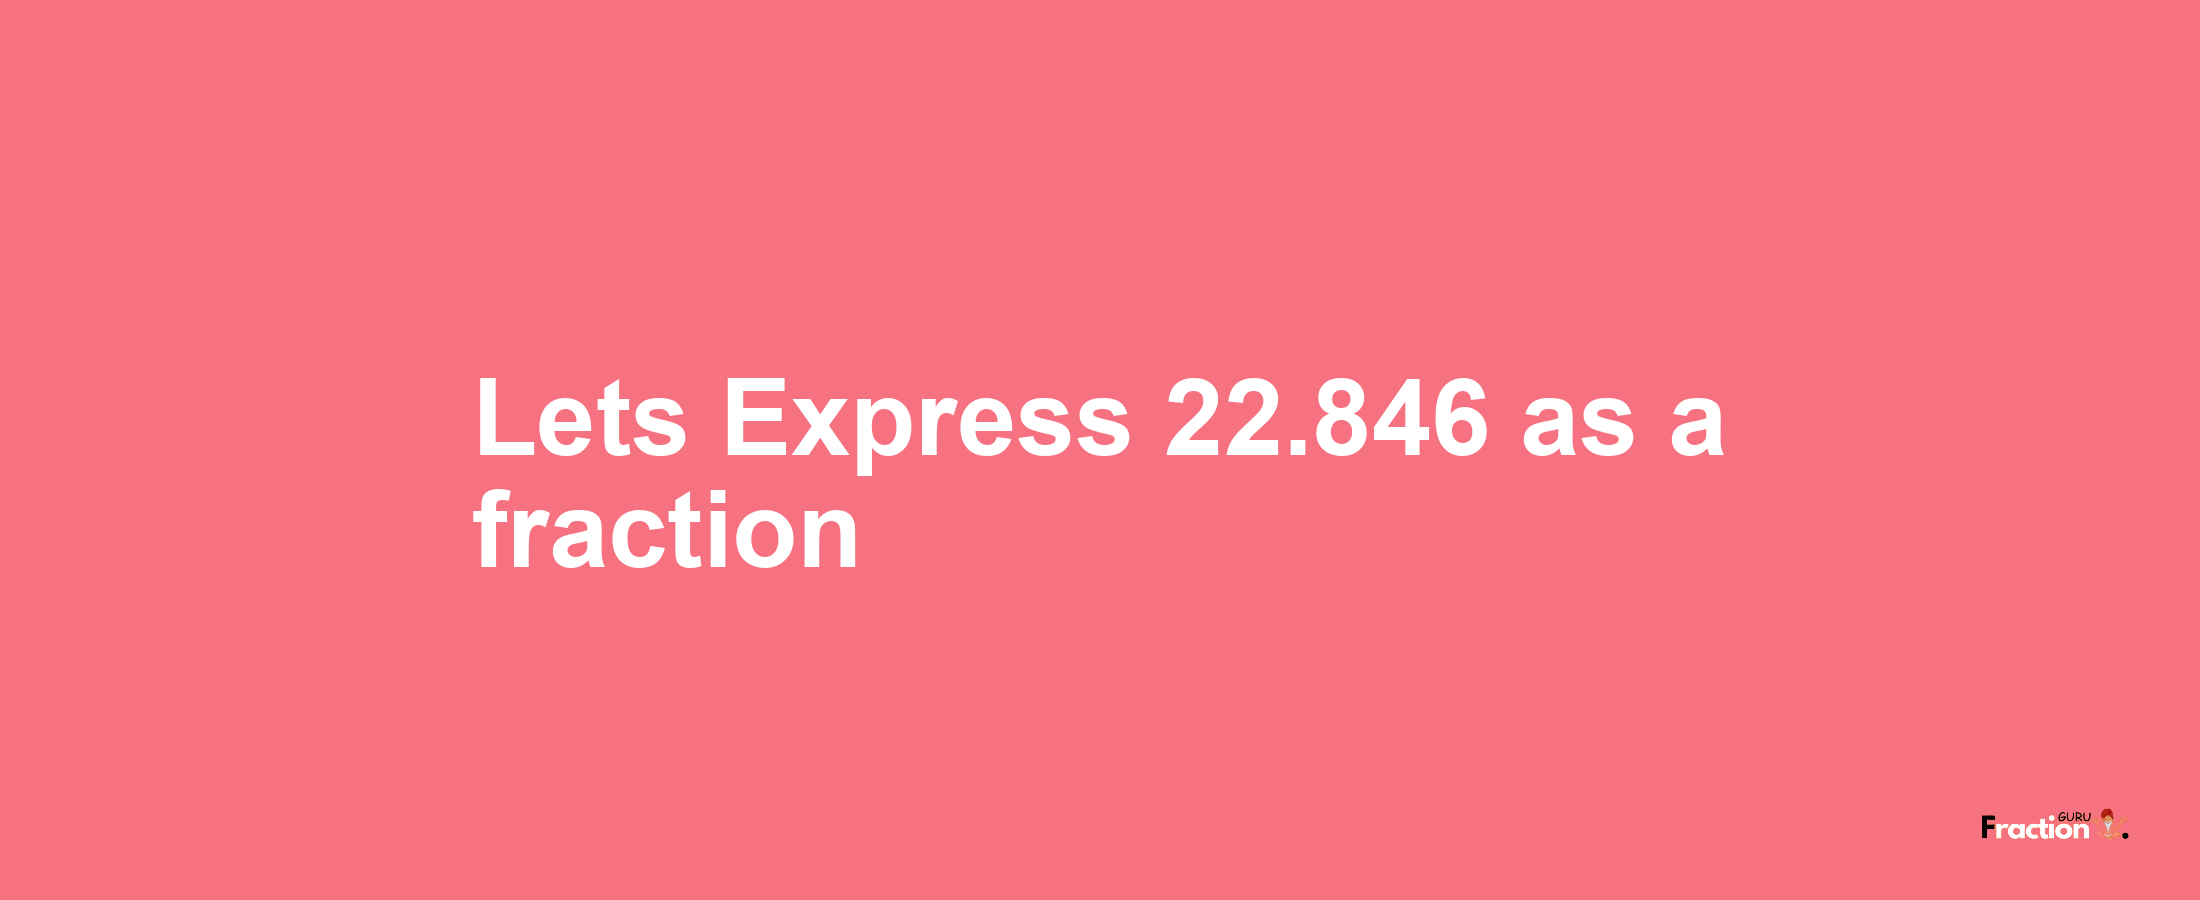 Lets Express 22.846 as afraction